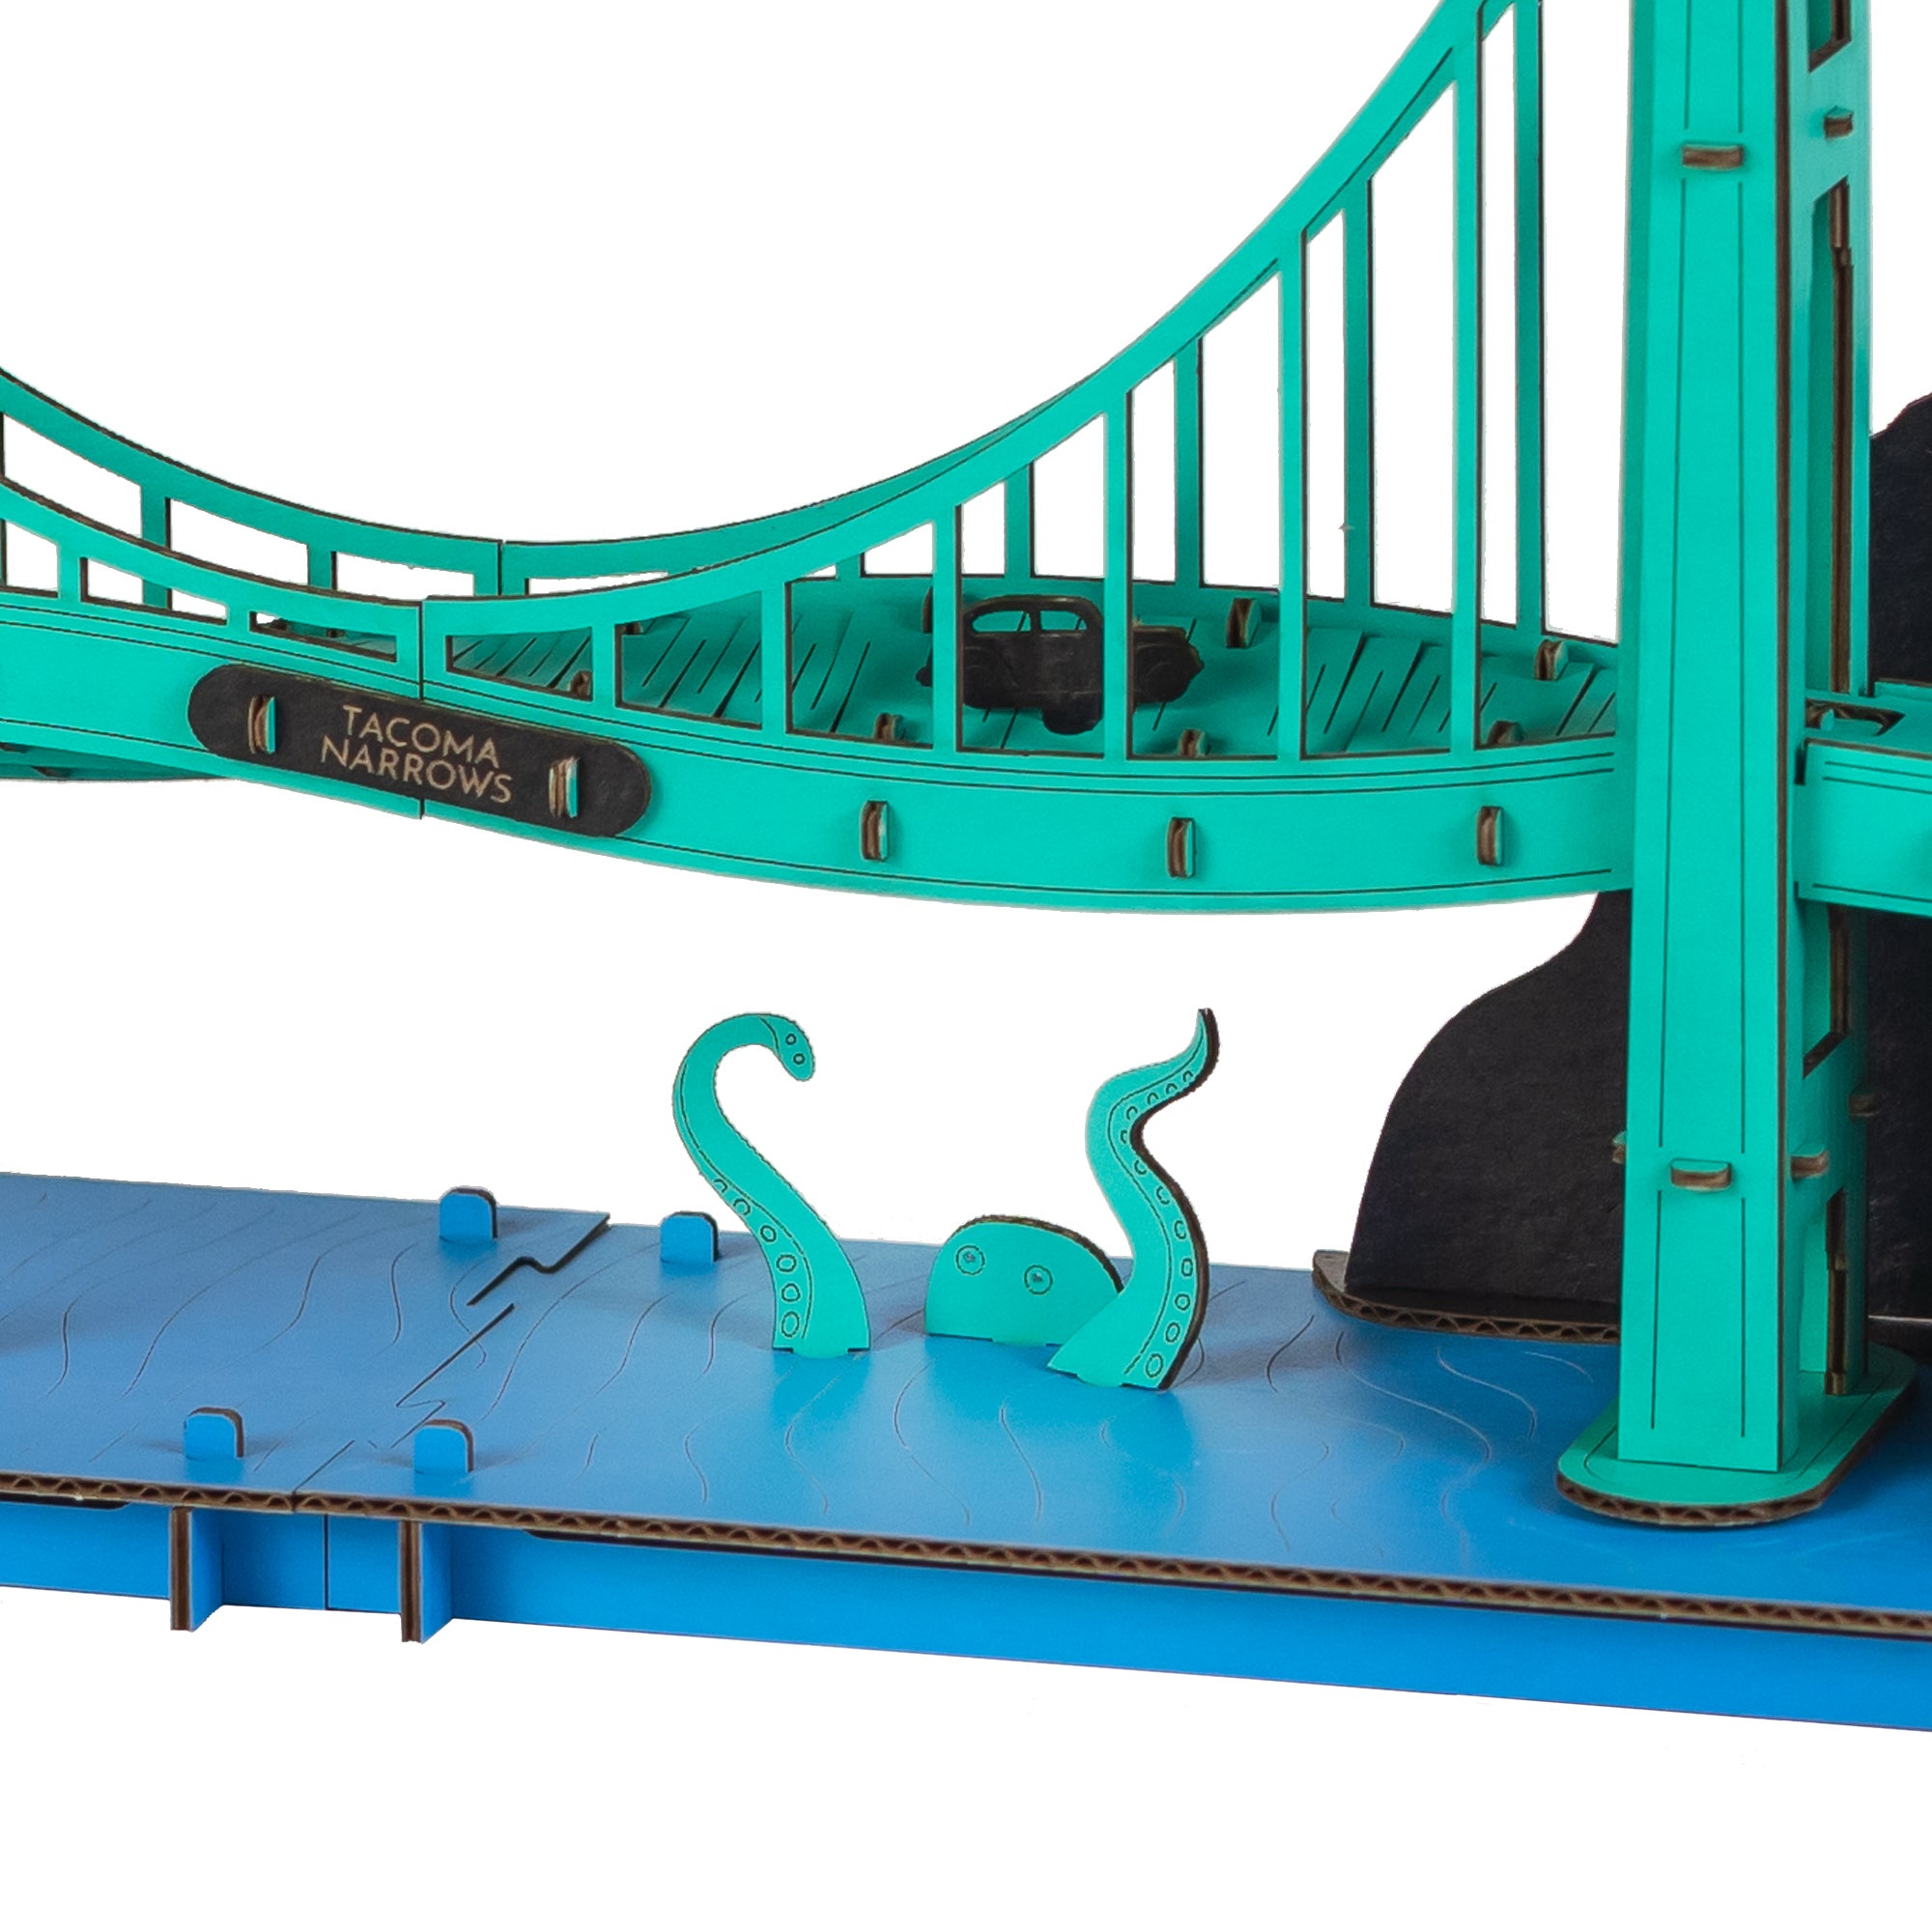 Anomaland Tacoma Narrows Bridge Model Front View showing octopus reaching up to twisting road bed